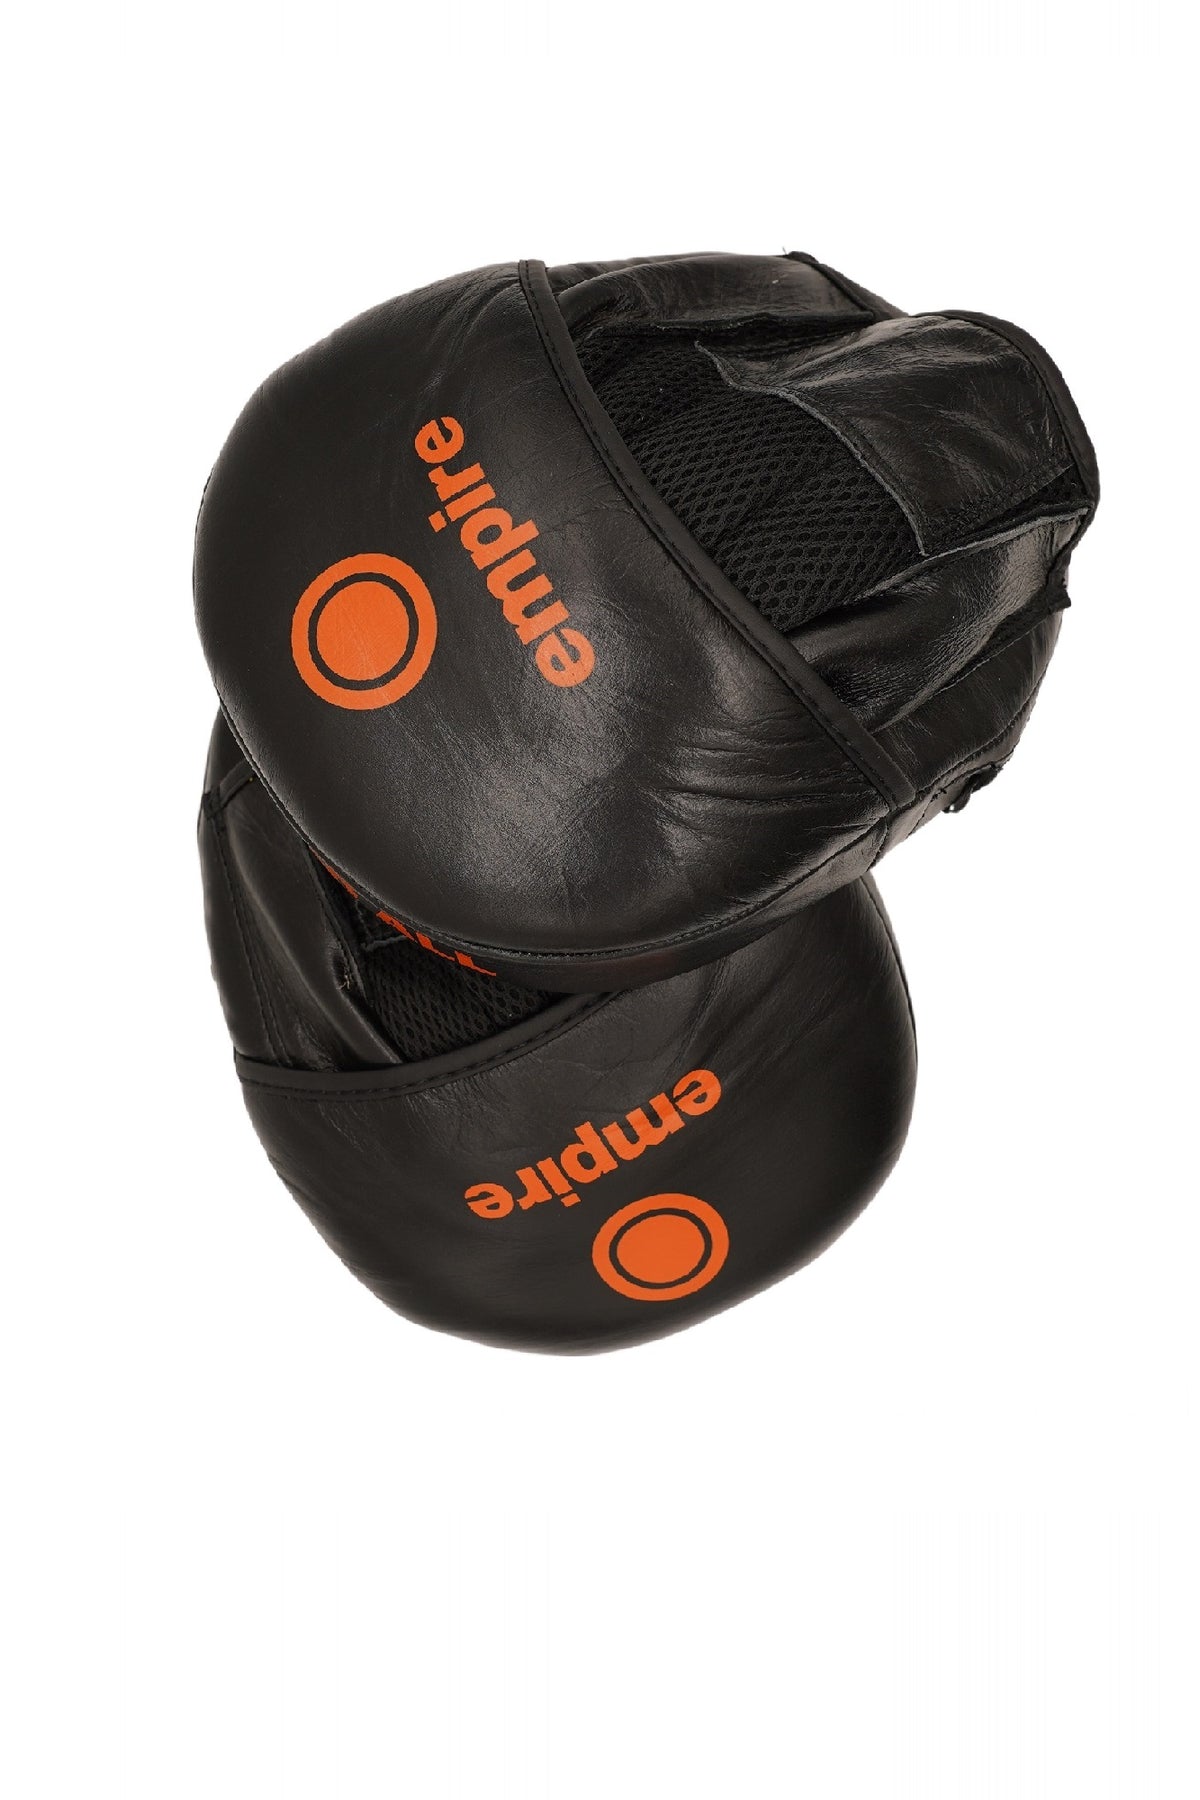 EMPIRE PUNCHERS MITTS